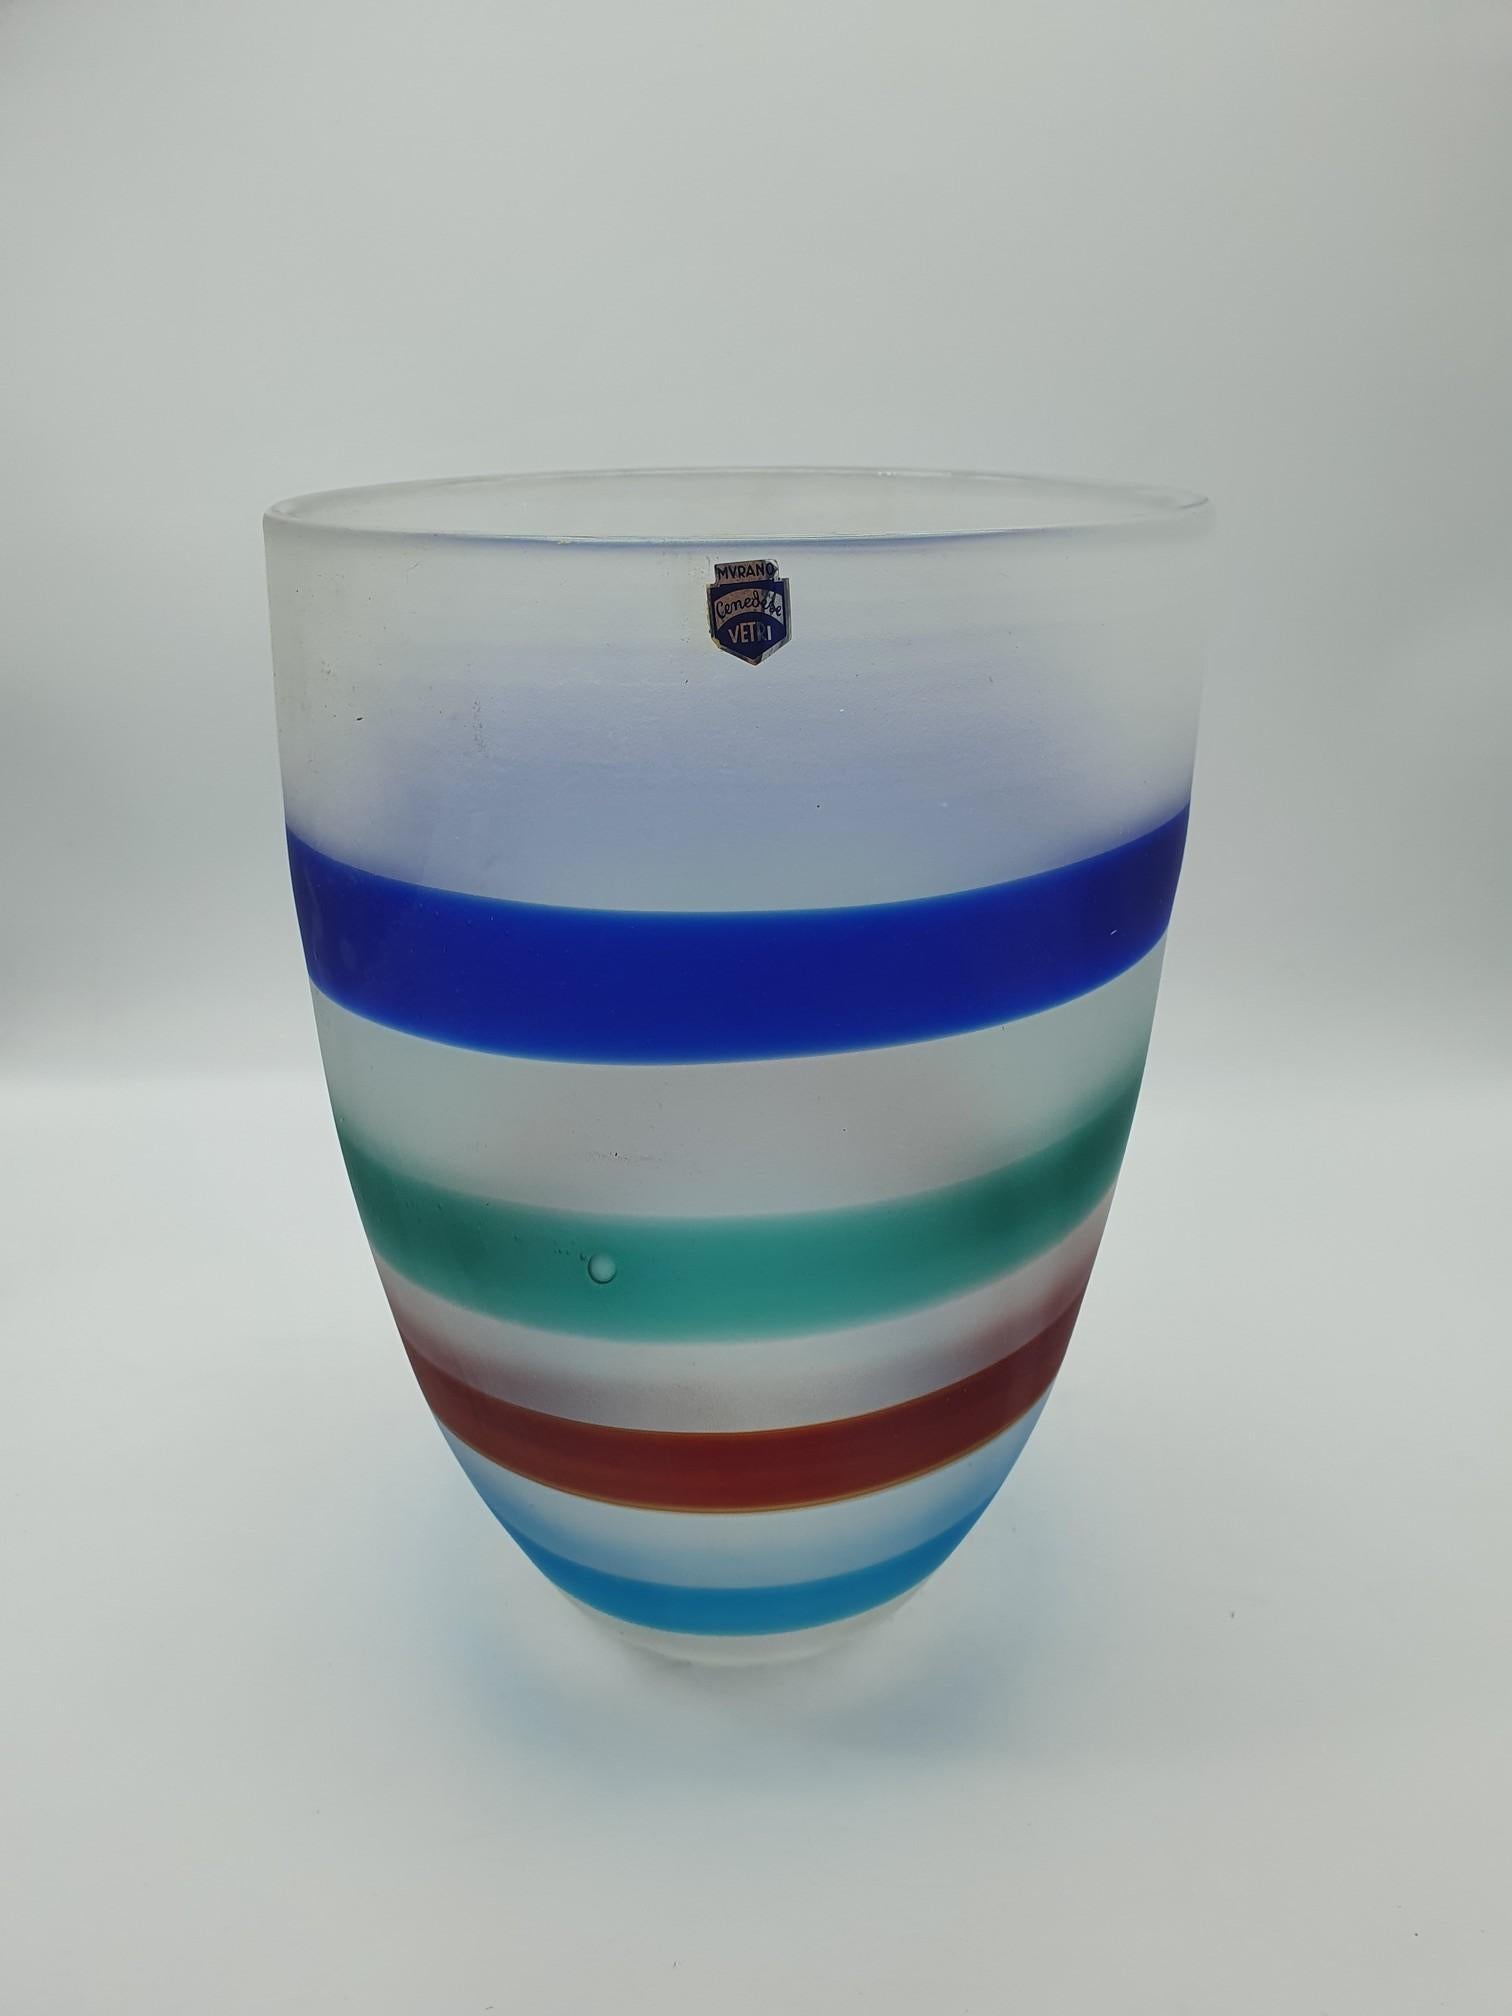 This great vase from Gino Cenedese e Figlio was made in the early 1990s, and features multicolored bands (blue, green, red and tourquoise) on a whitish background. The vase is completely handmade and mouth-blown in Murano, and the matte effect comes